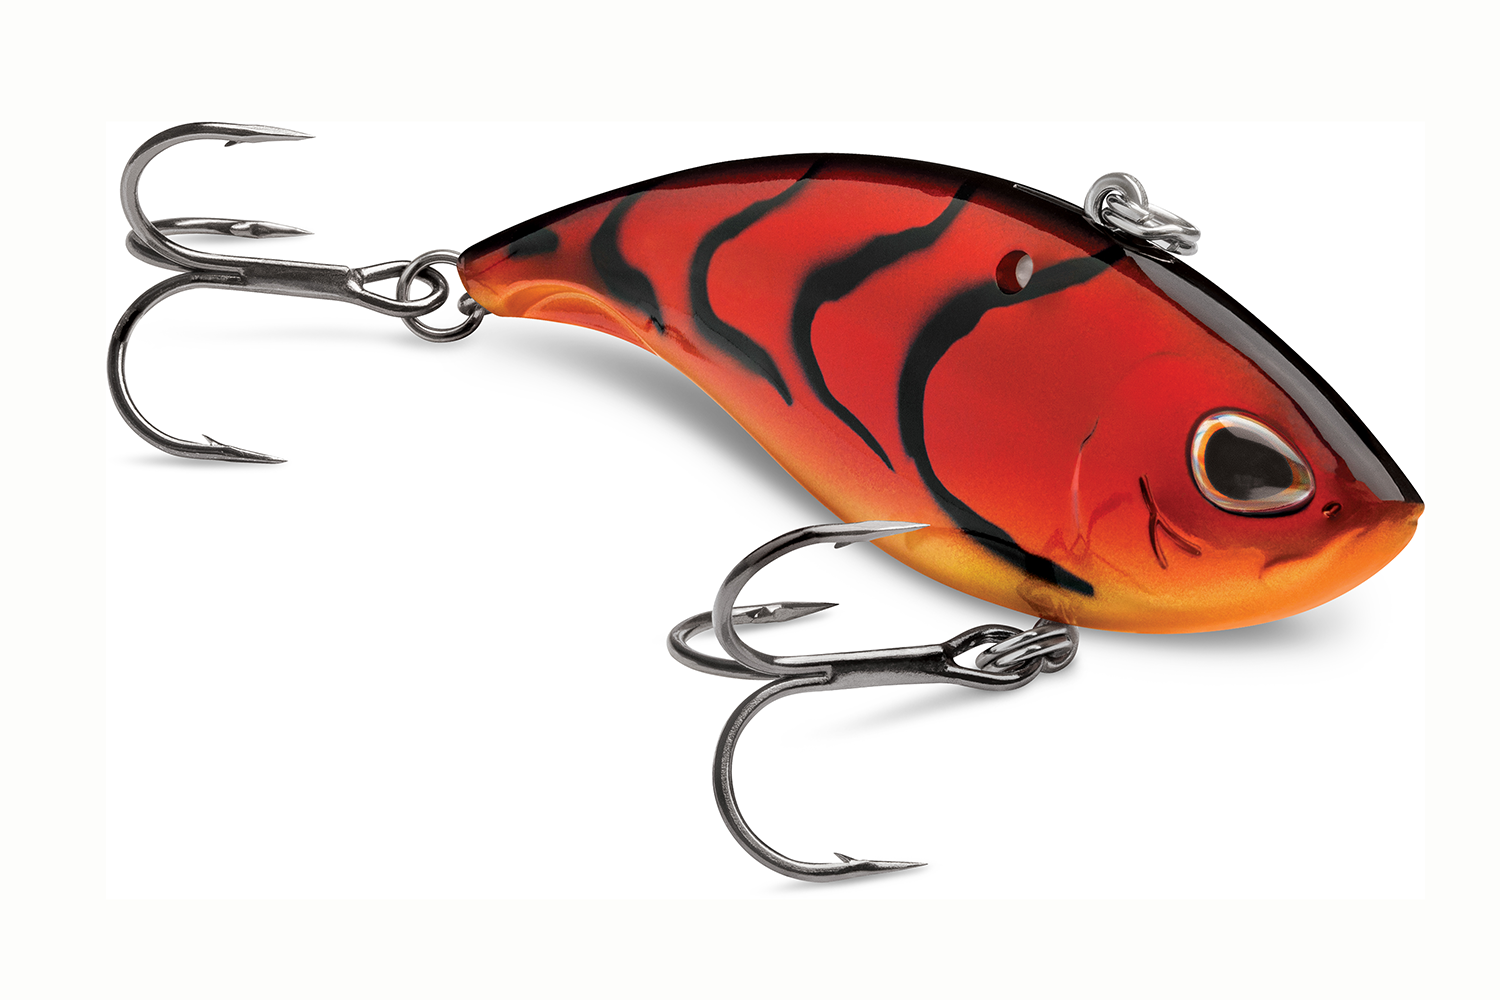 <p><b>New Storm Arashi Vibe Colors </b></p>
<p>Inspired colors from the Bassmaster Classic Champion Ott DeFoe. A pair of colors that are must-haves, one of which (Classic Craw) helped Ott win the 2019 Bassmaster Classic! Fluorescent Red Craw rounds out the new colors, for now. </p>
<p><a href=